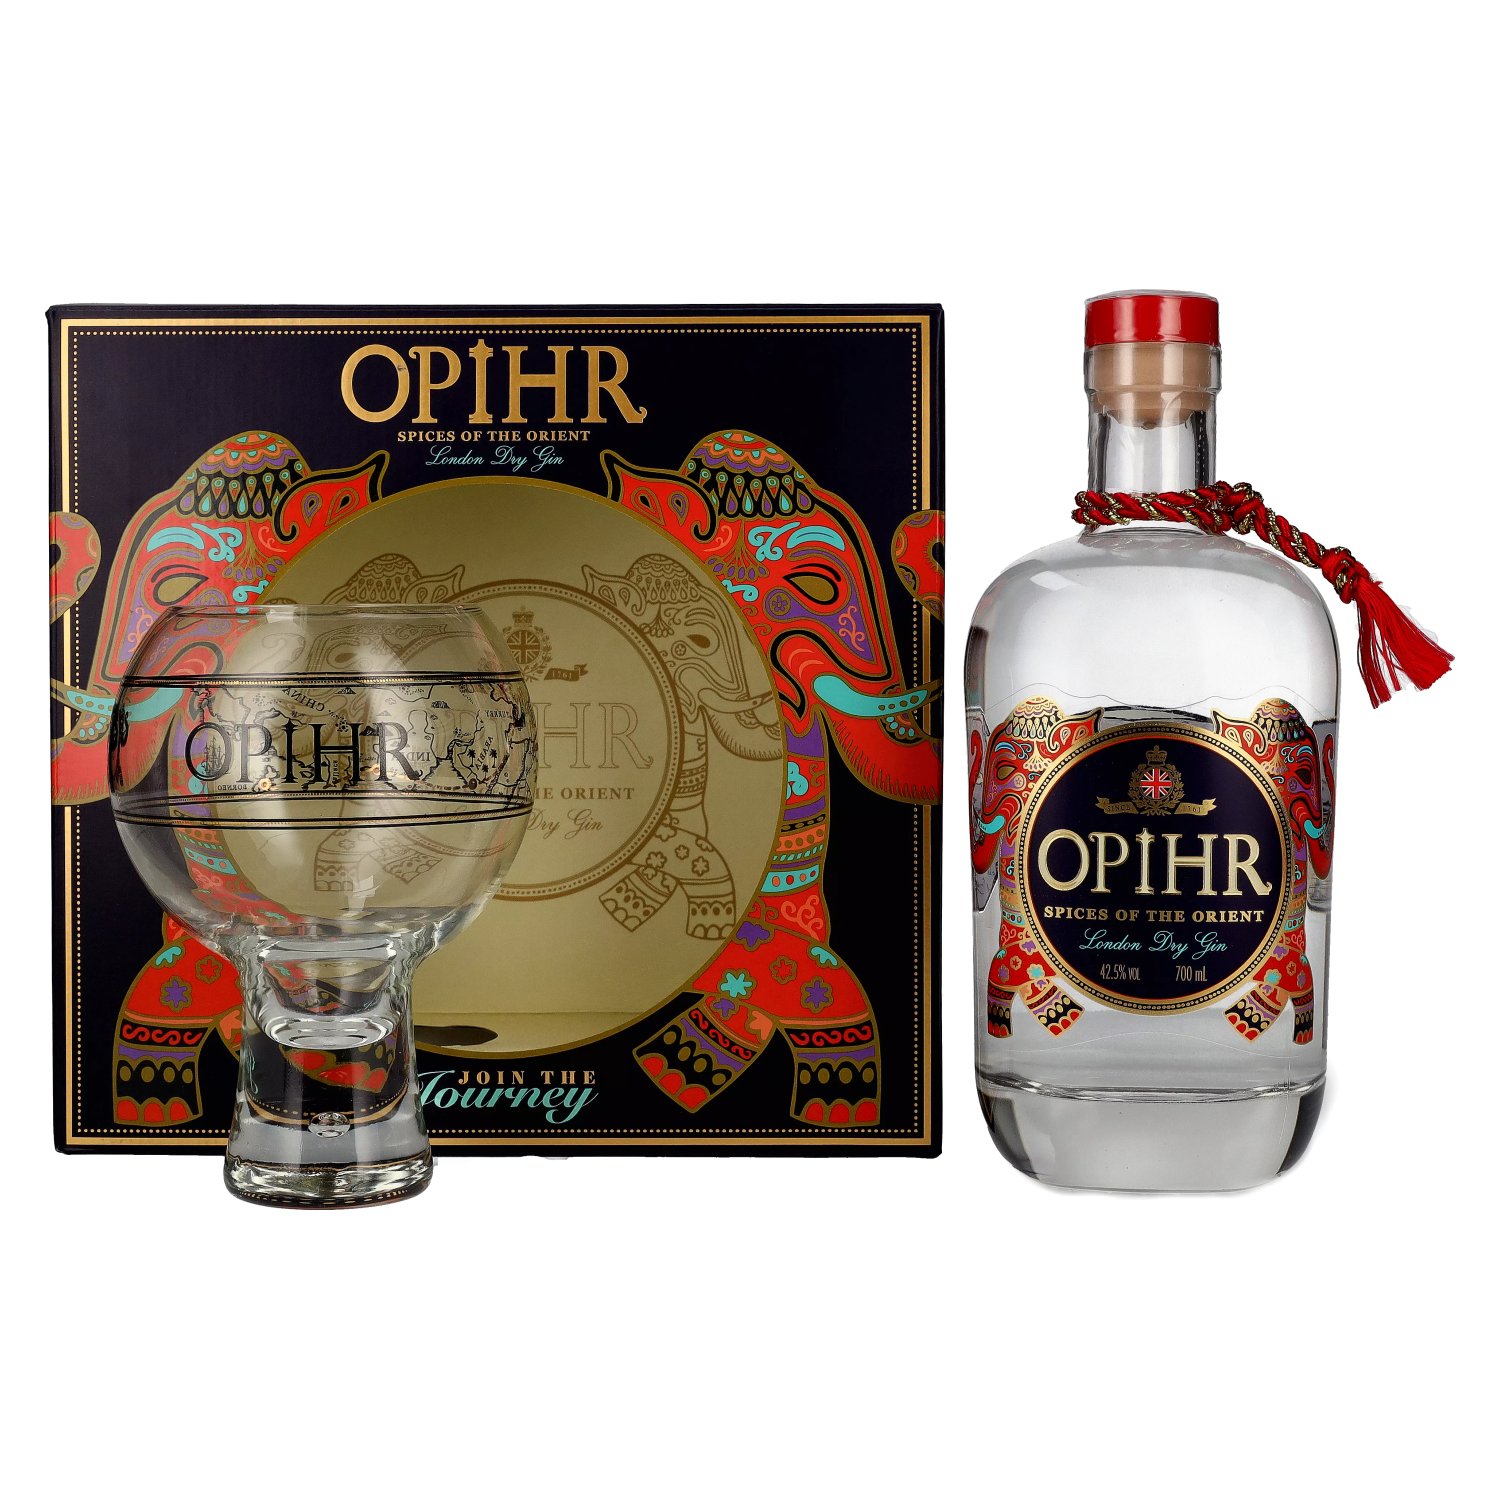 Opihr with Globe-glass 42,5% Dry 0,7l London ORIENTAL Gin Giftbox SPICED Vol. in